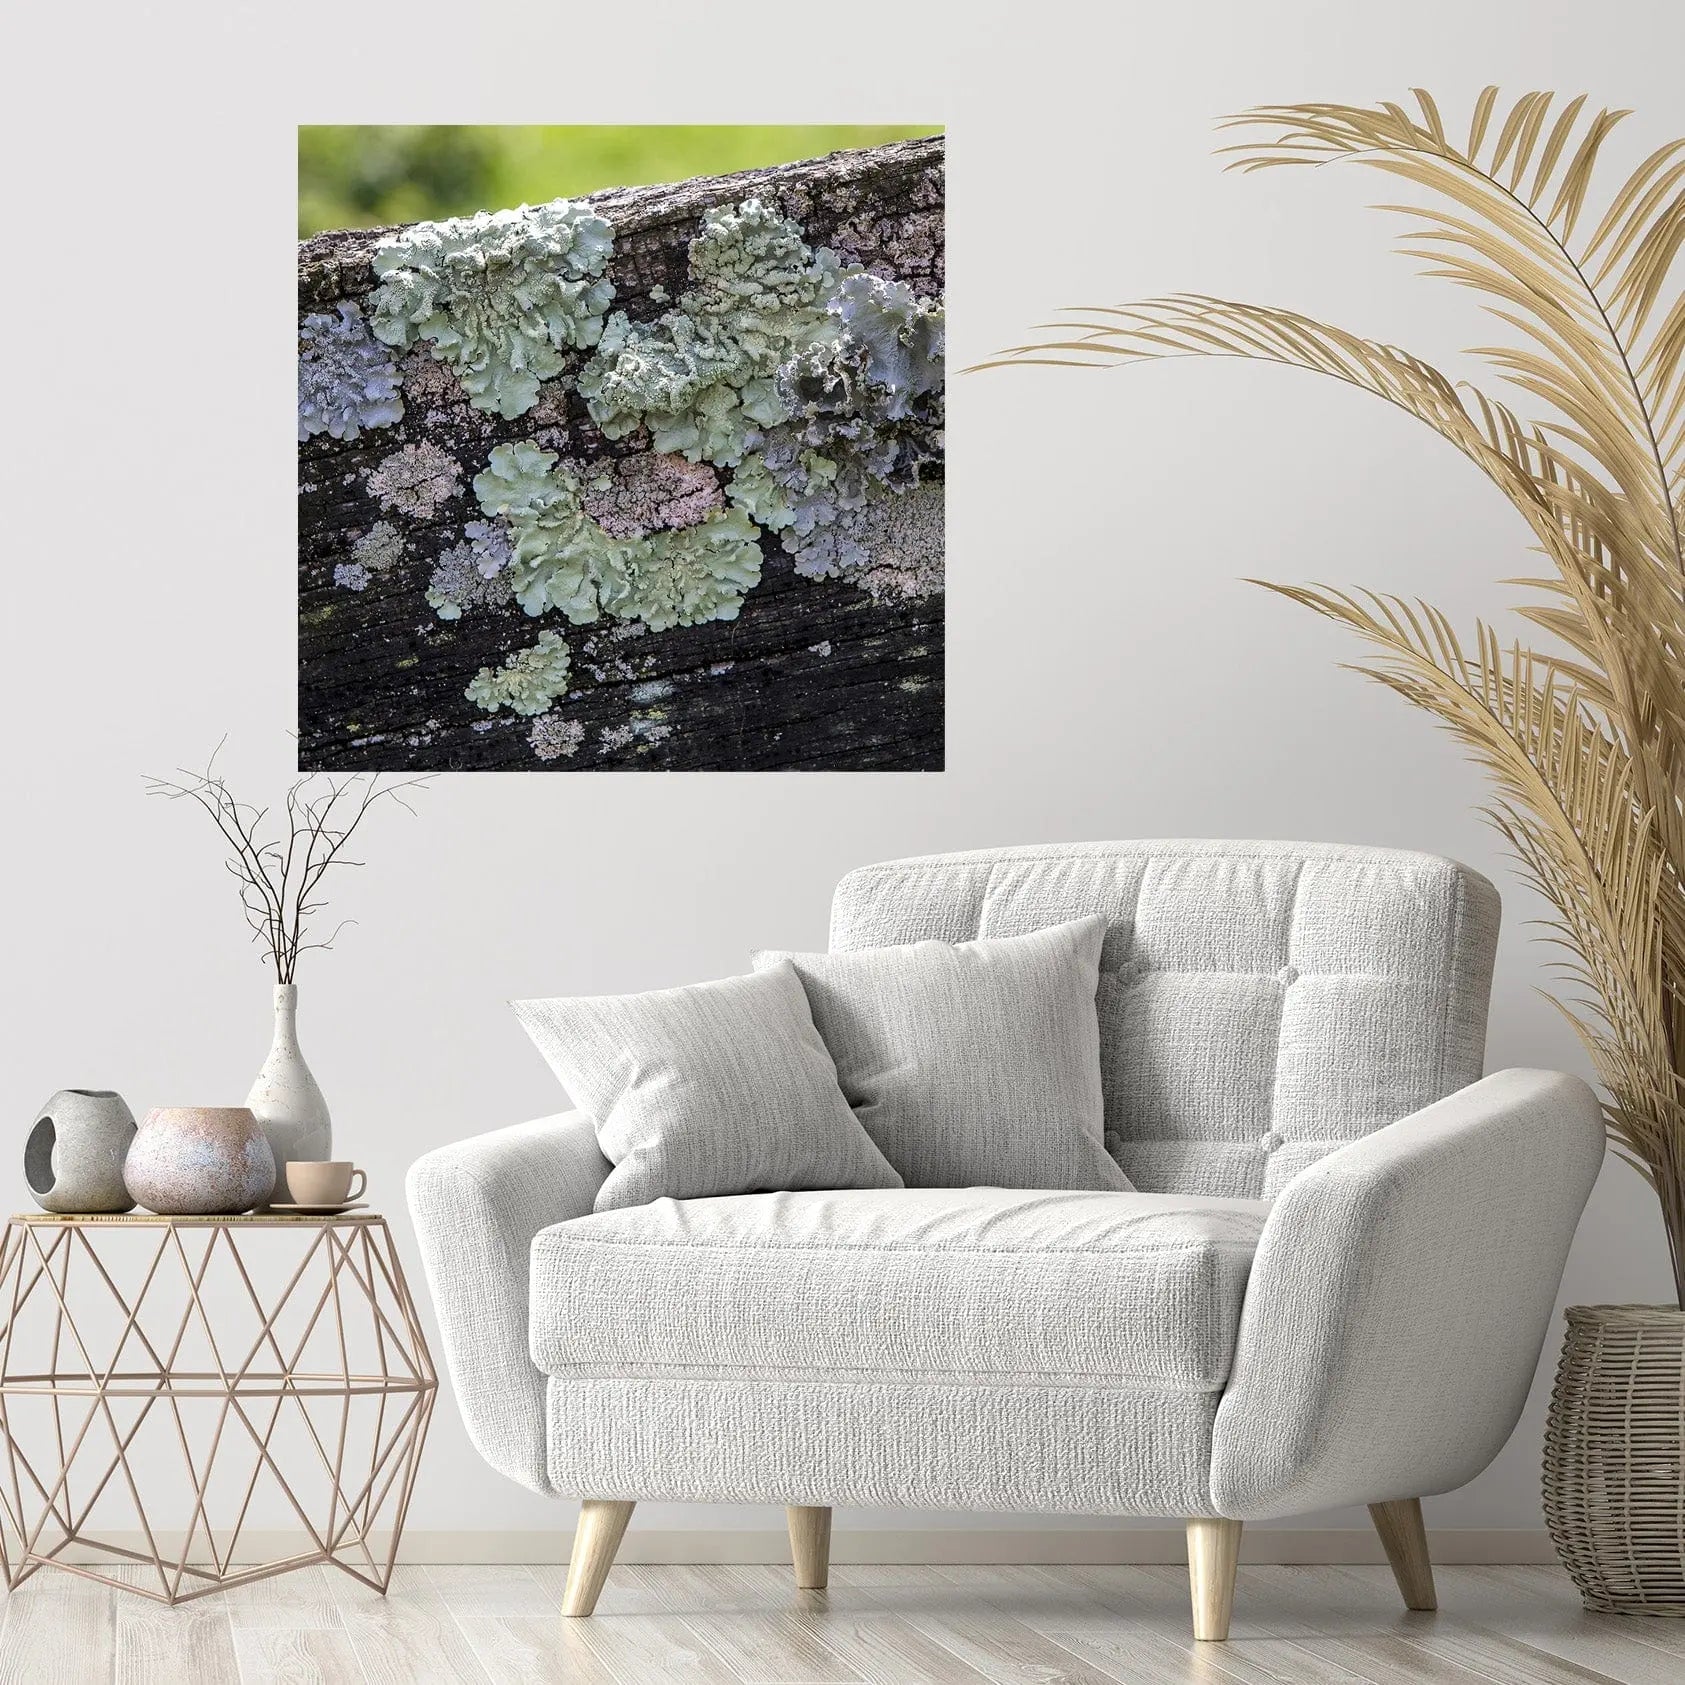 Lichen wall decor pastel colors wooden fence square fine art on white wall by Lisa Blount 20x20 24x24 custom sizes